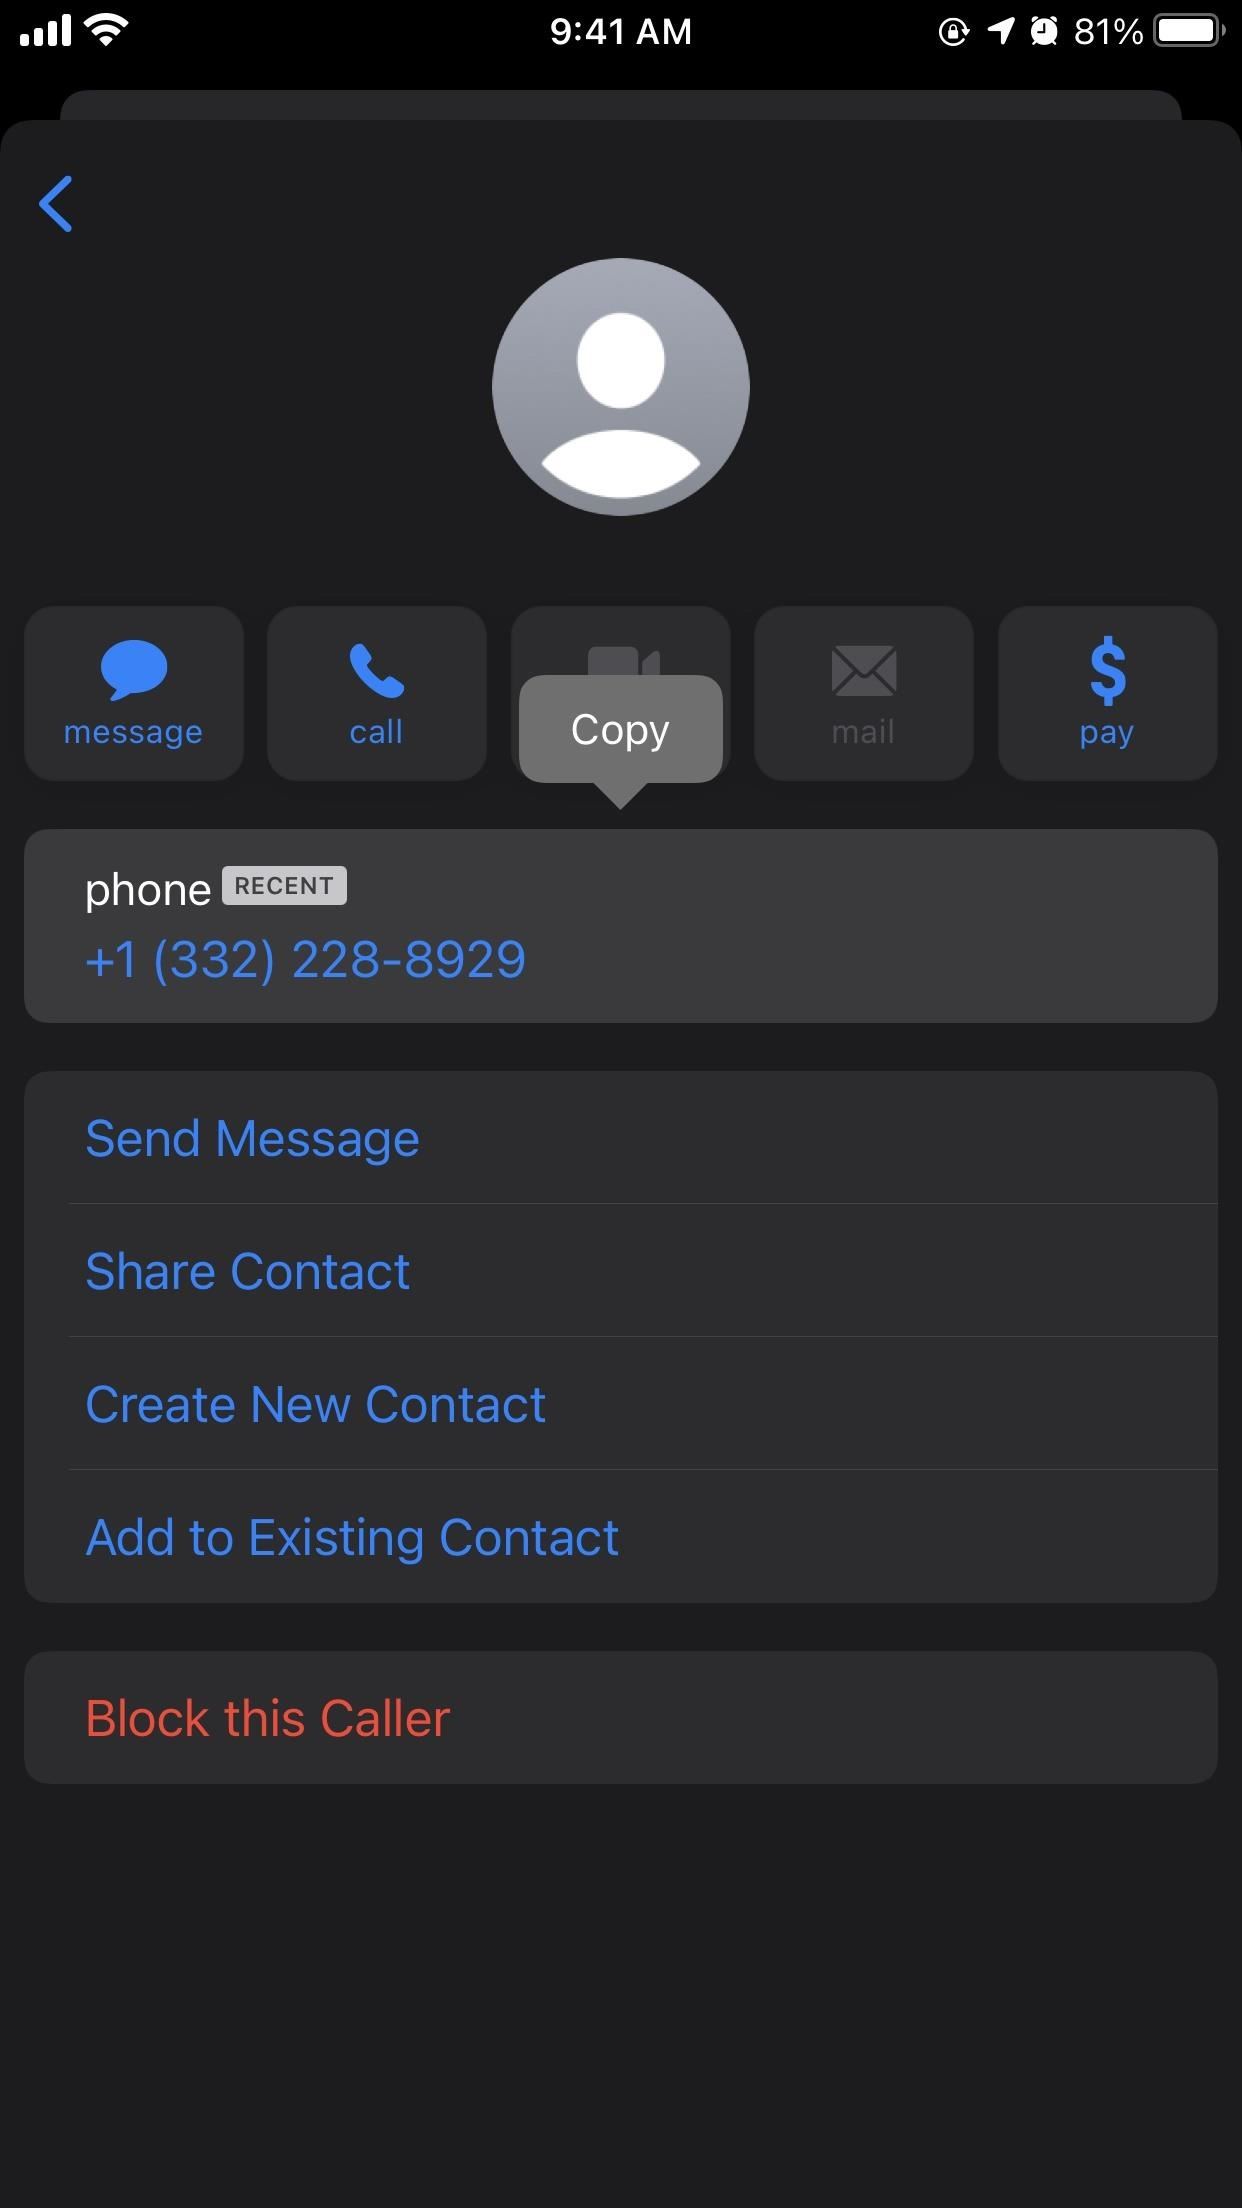 Eliminate Unwanted Texts & iMessages on Your iPhone to Avoid Spam, Scams & Phishing Attacks